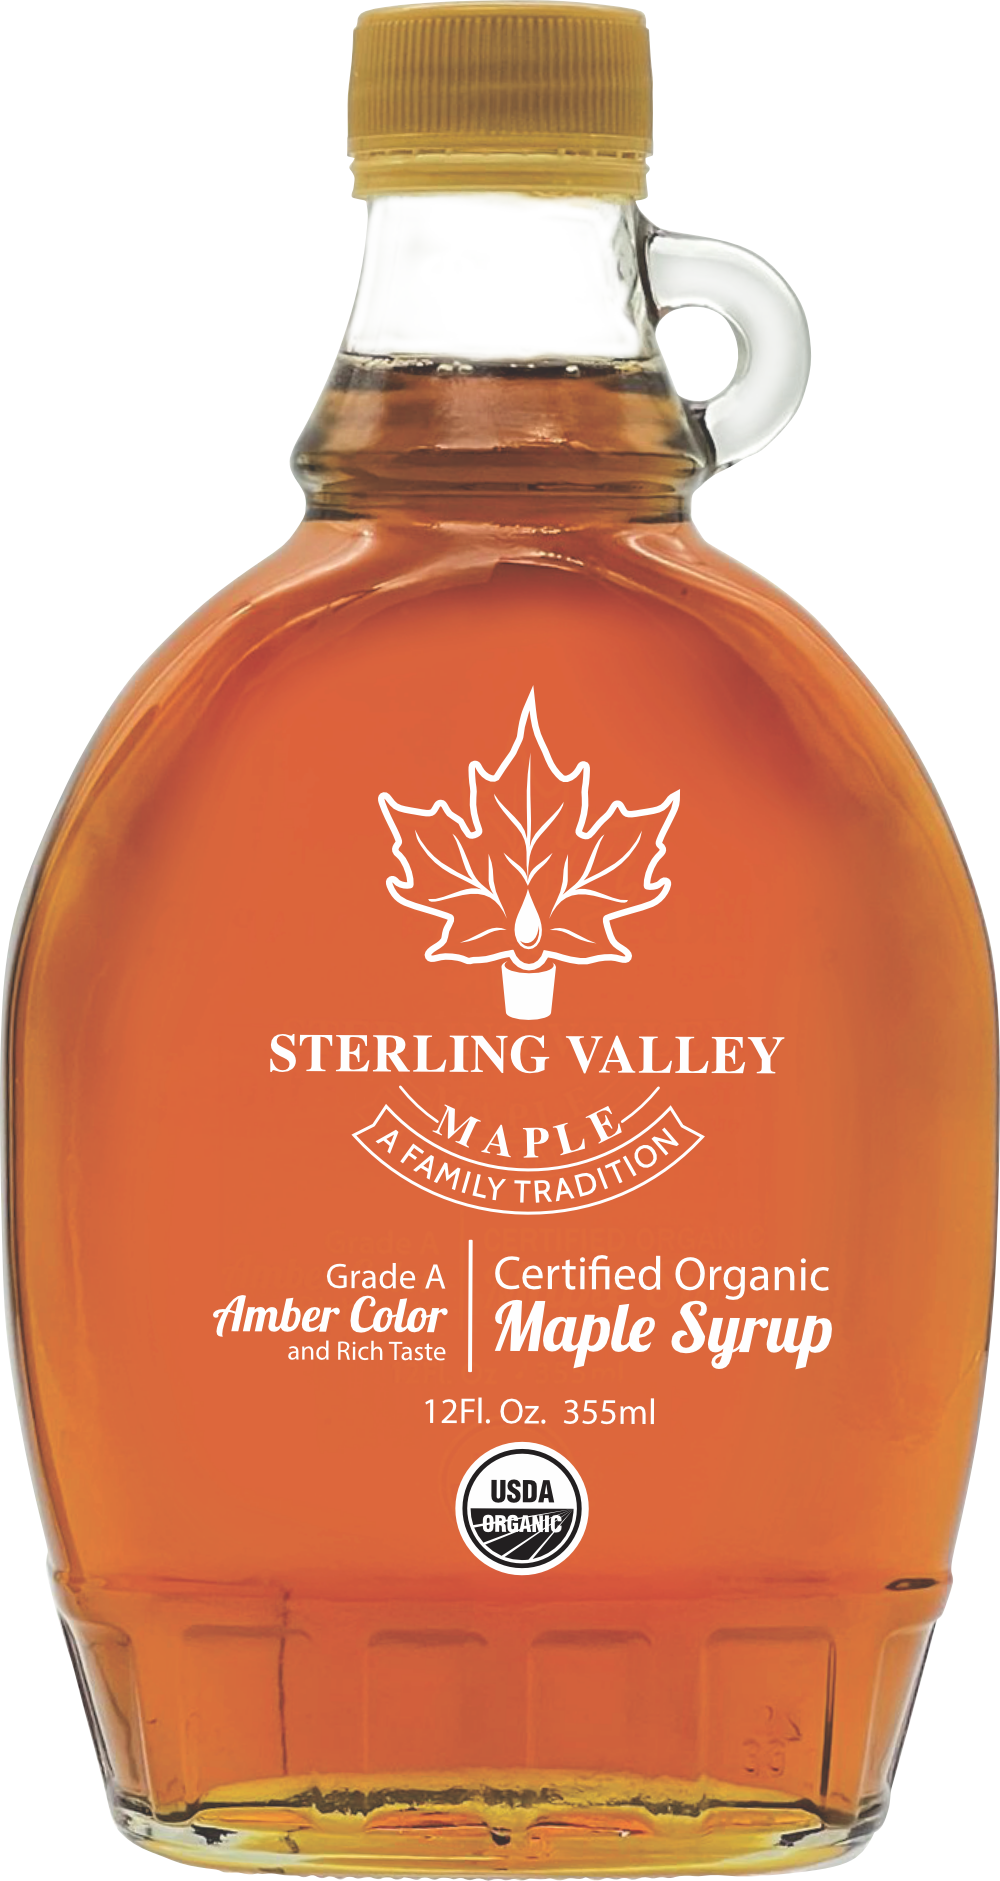 Certified Organic Maple Syrup: Amber Color/Rich Taste: 8oz